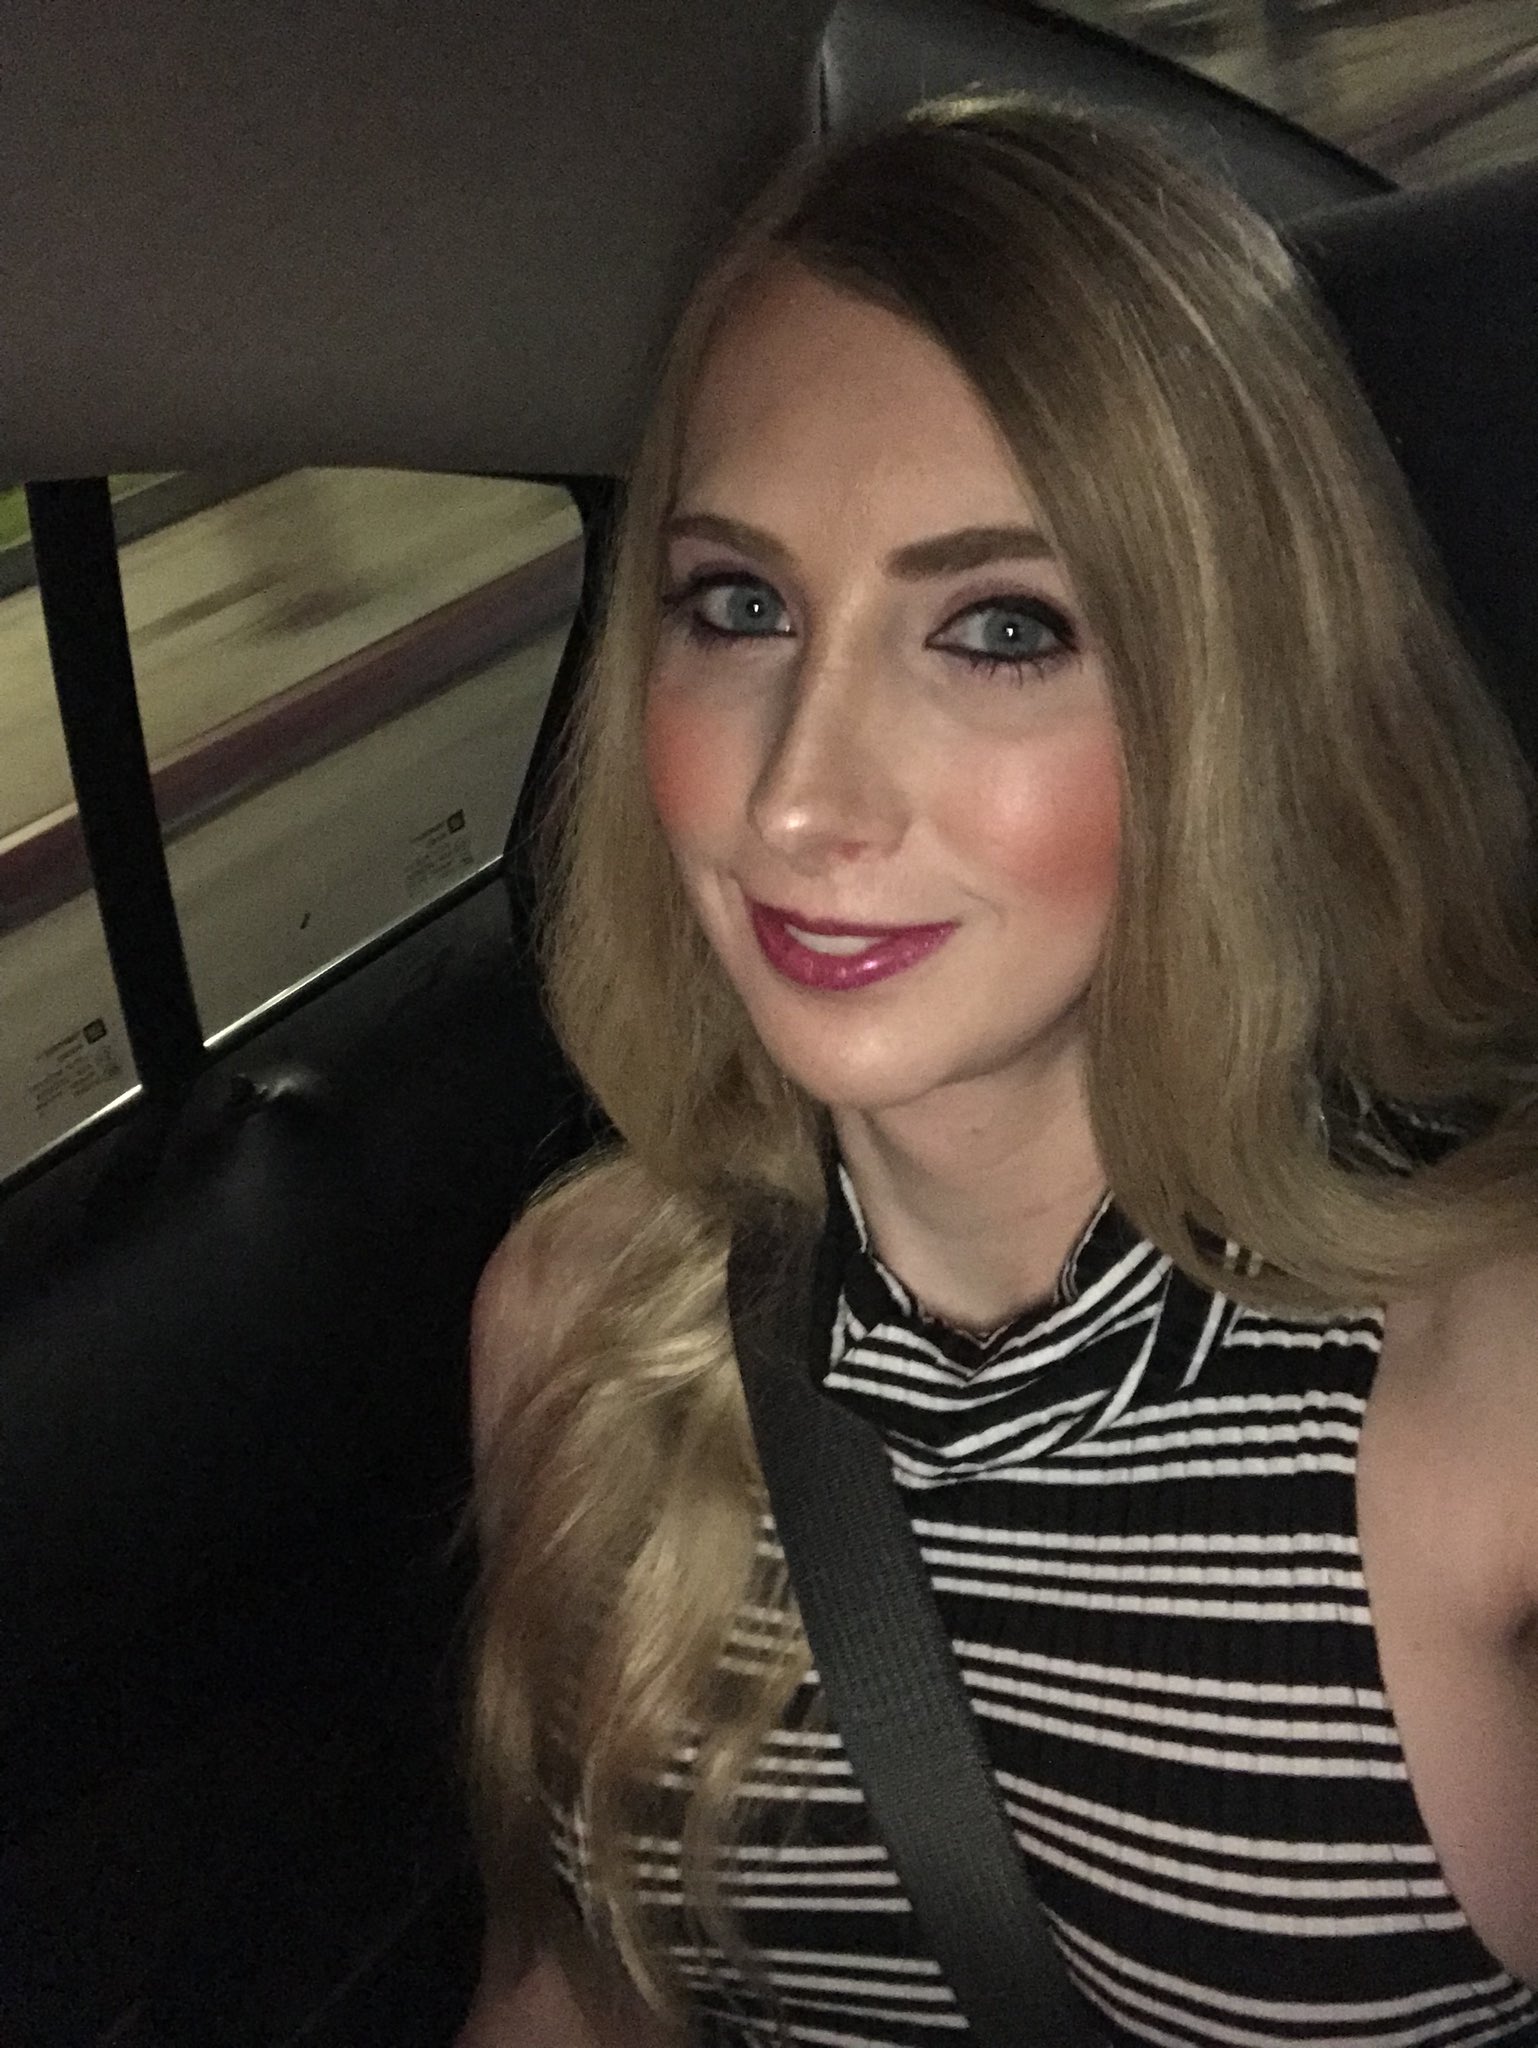 X 上的Janelle Fennec：「On my way over to the @XBIZ awards! Very Excited 😊!  https://t.co/xSsLmRcHWh」 / X